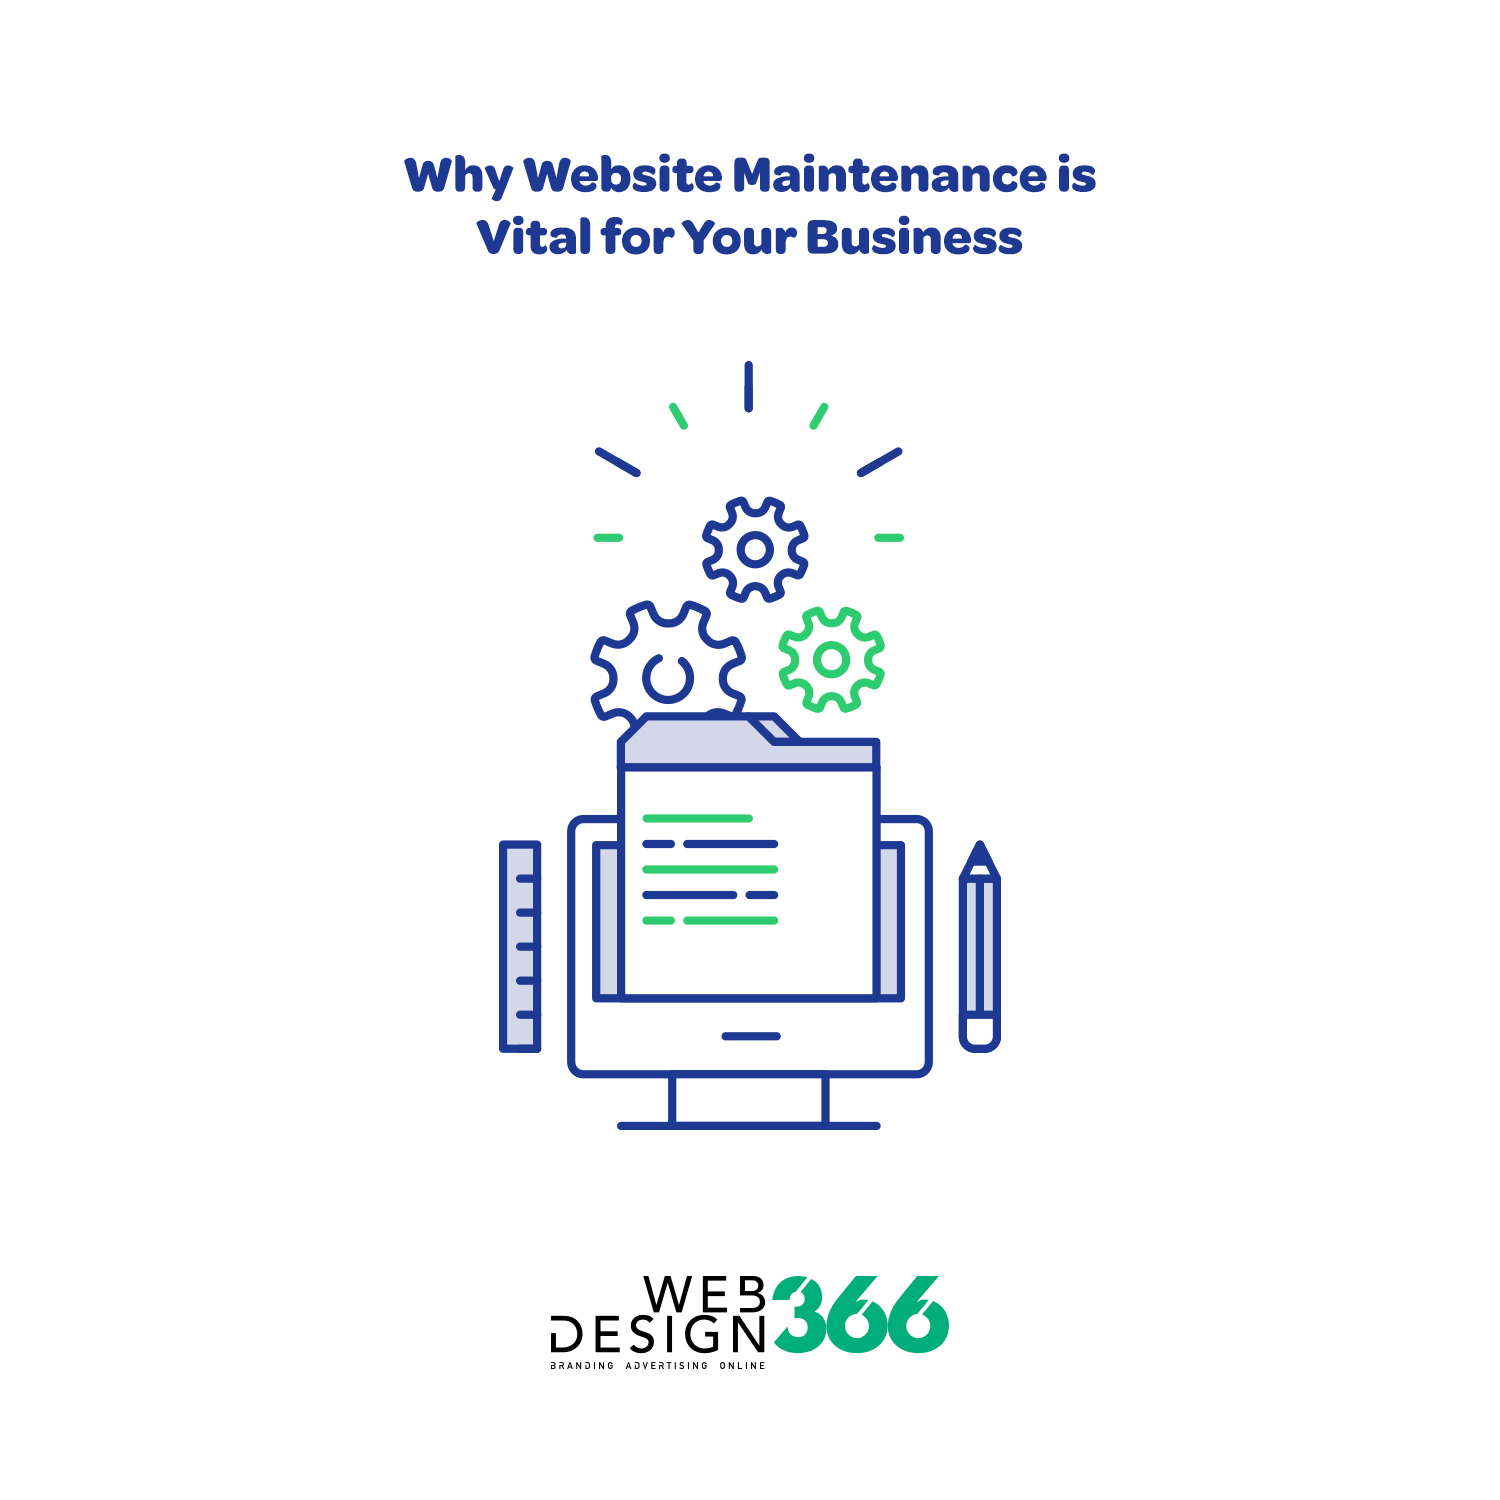 Why Website Maintenance is Vital for Your Business